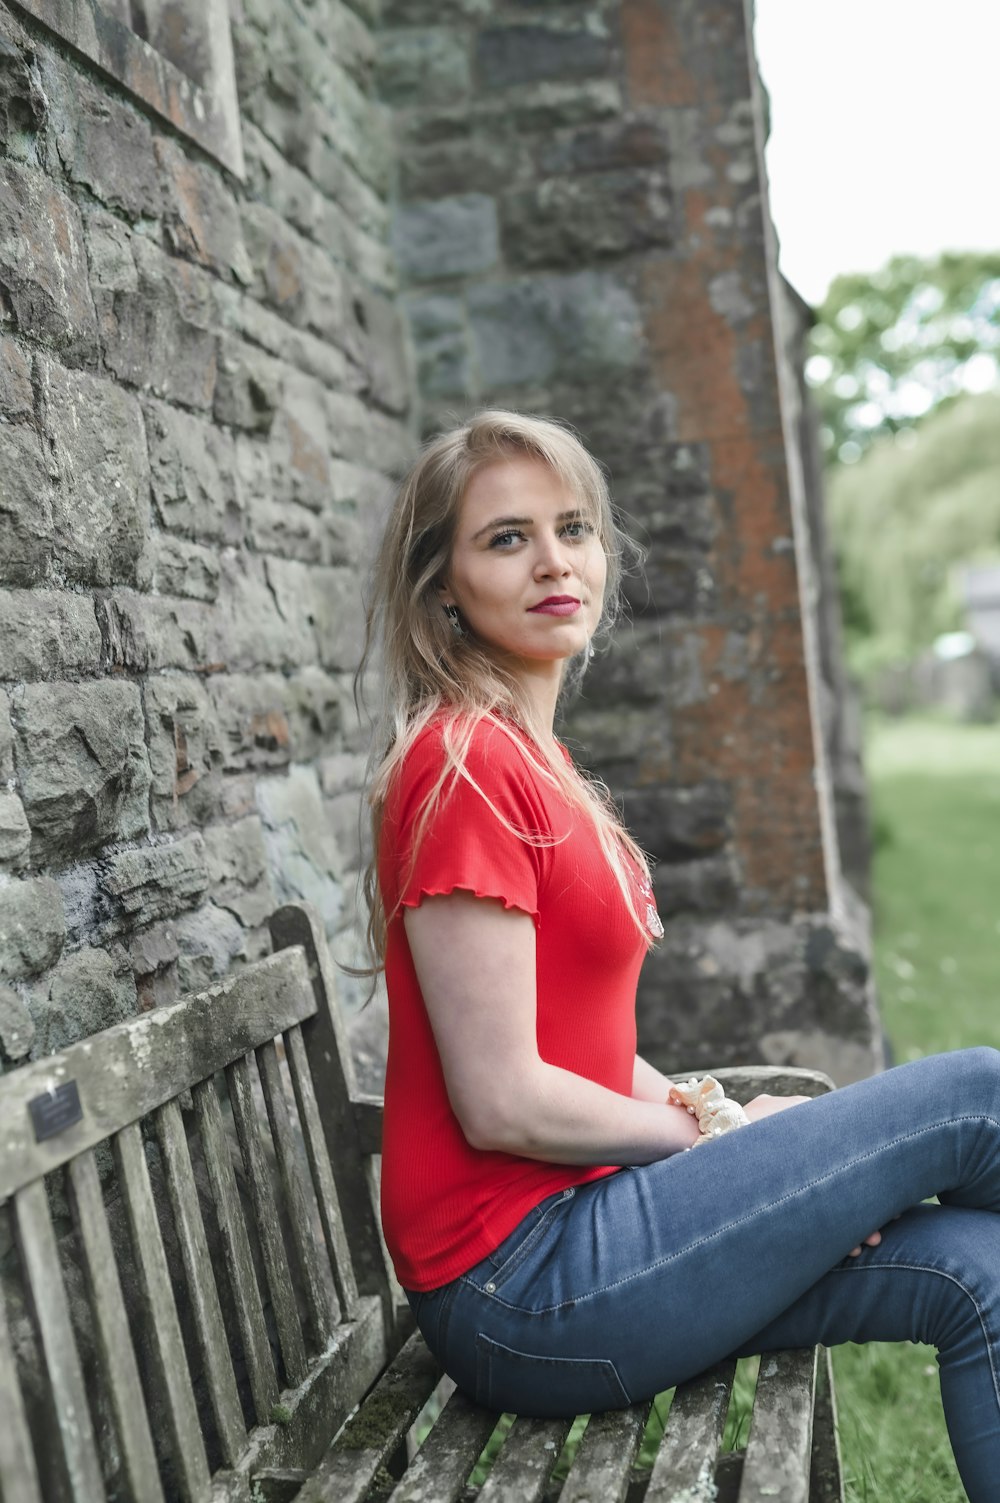 woman in red shirt and blue denim jeans sitting on brown wooden bench